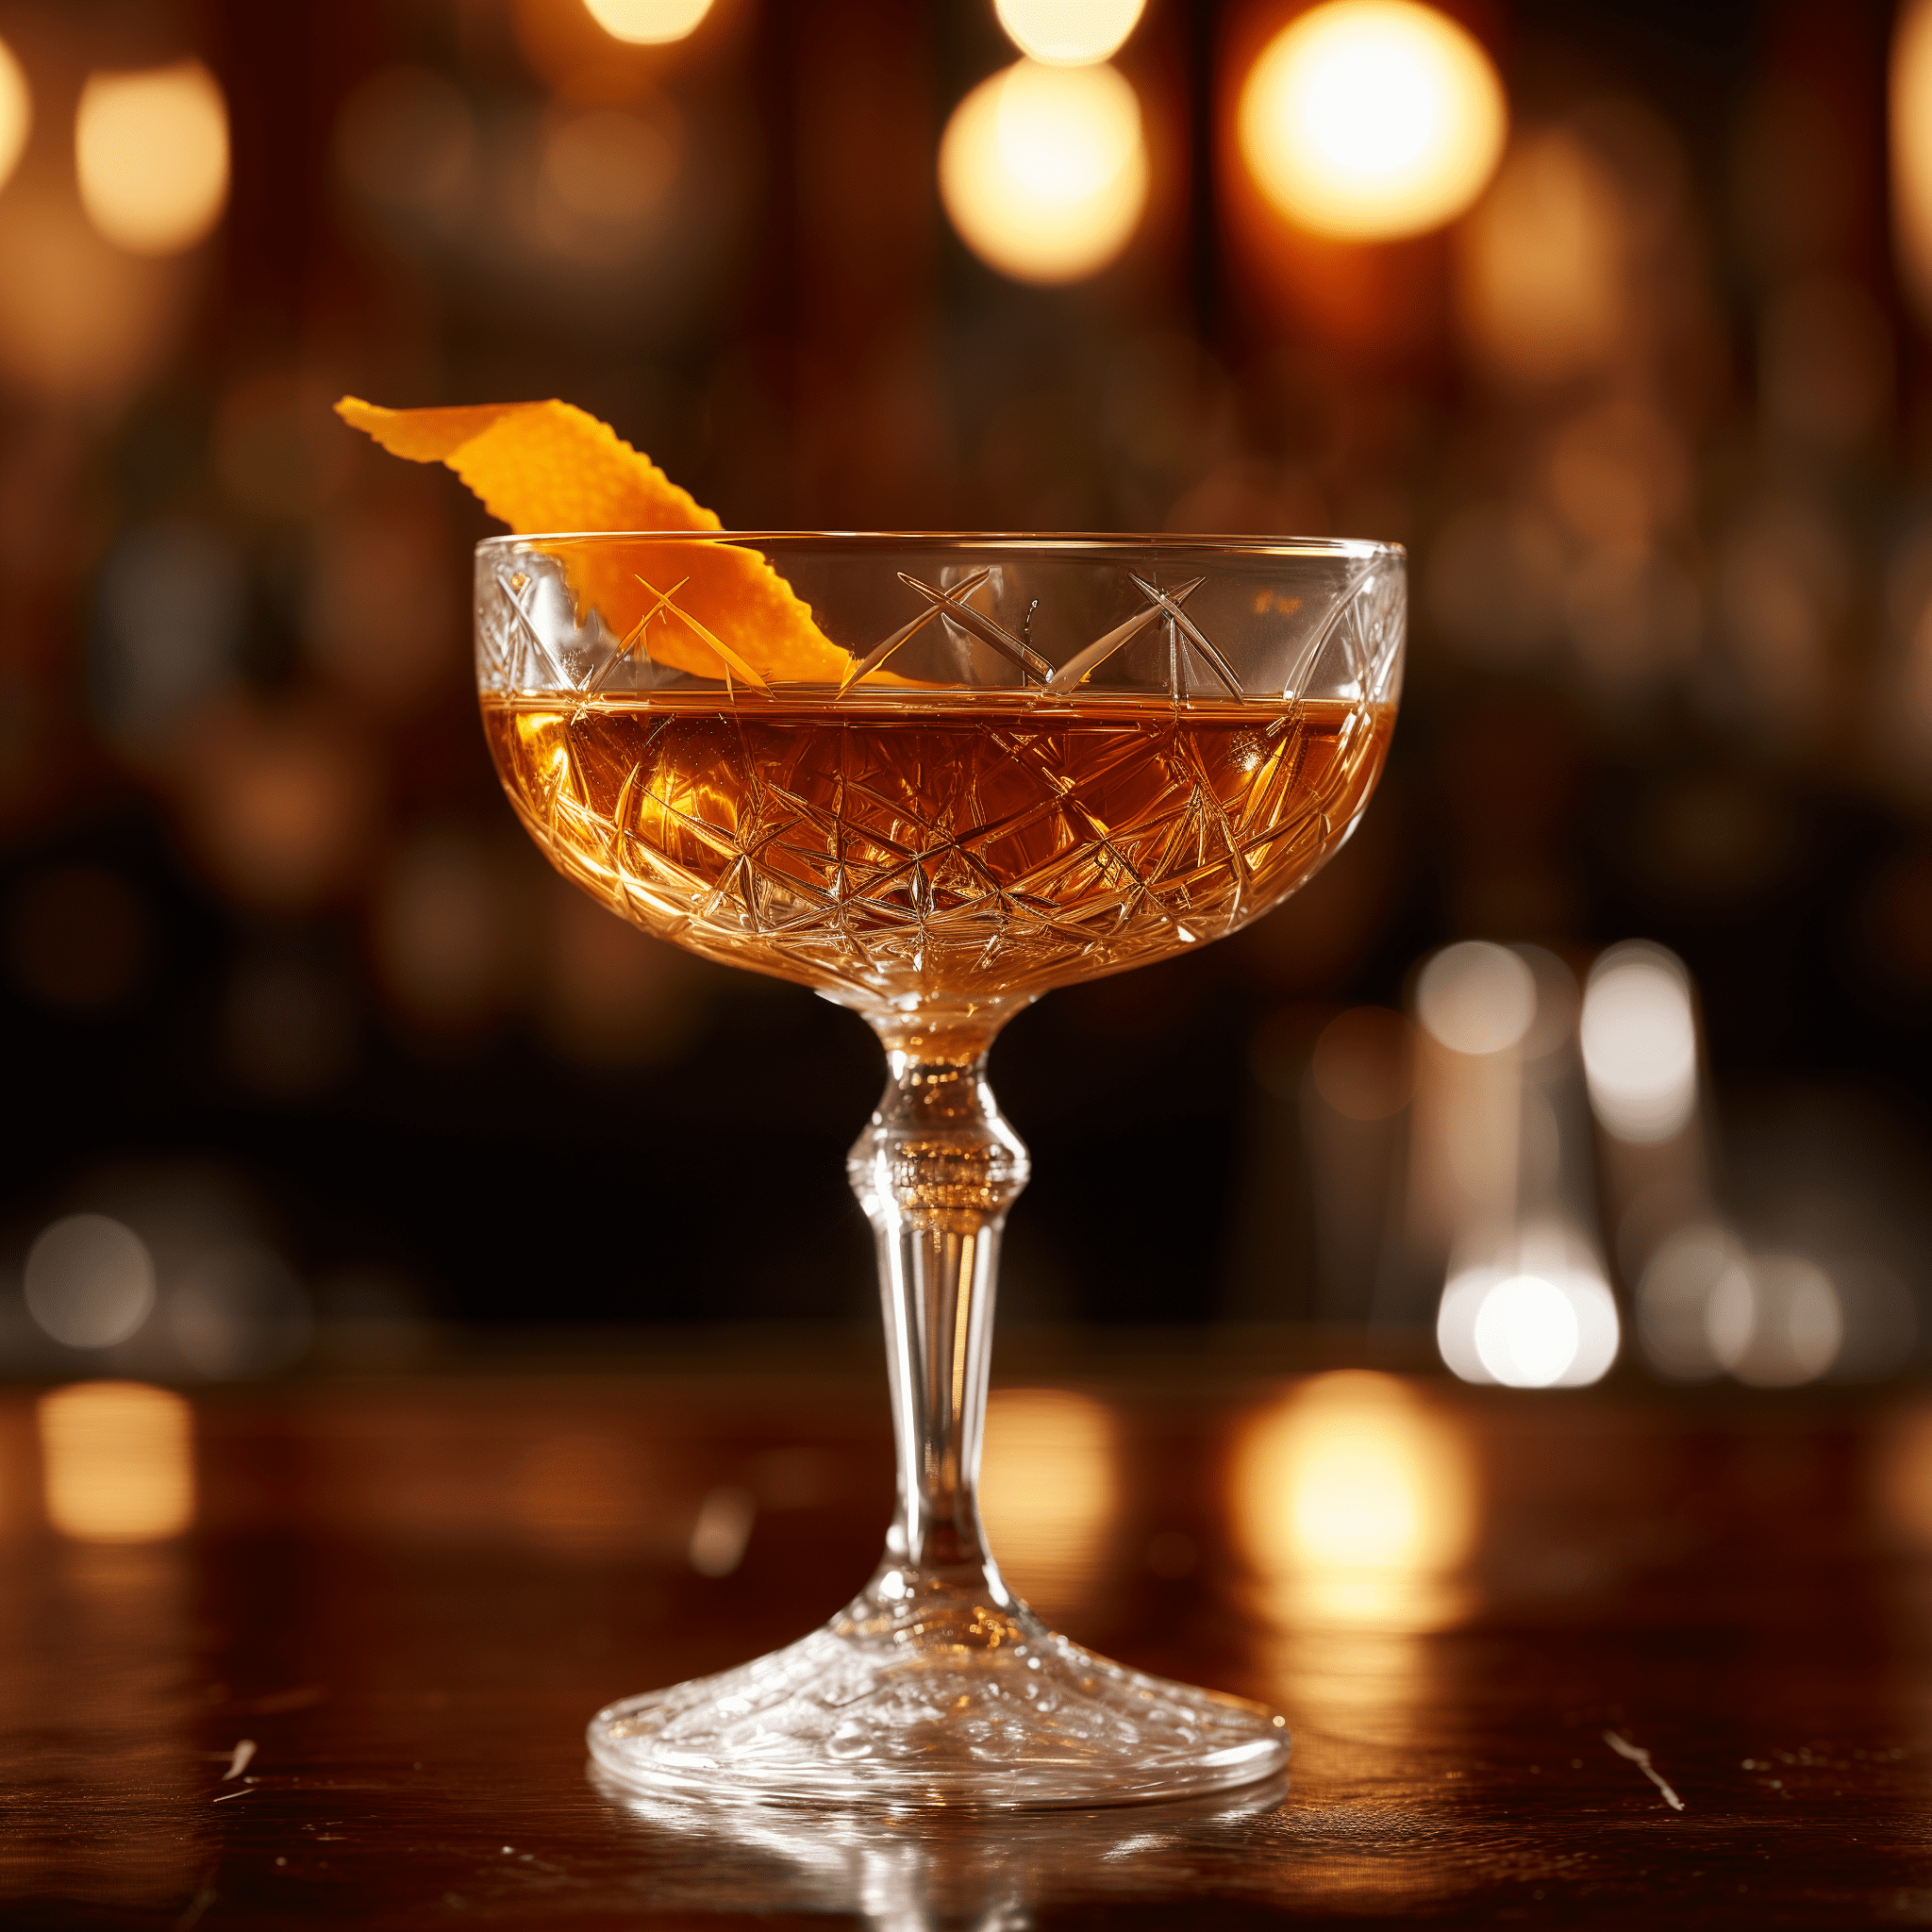 Tartan Cocktail Recipe - The Tartan cocktail offers a rich tapestry of flavors. It's a strong and warming drink, with the smoky peat of the Scotch and the herbal bitterness of the Ramazzotti creating a complex base. The sweetness of the Drambuie and the Cocchi Vermouth di Torino balance the bitterness, while the Angostura bitters add a spicy depth. The orange twist garnish provides a bright, citrus aroma that rounds out the experience.